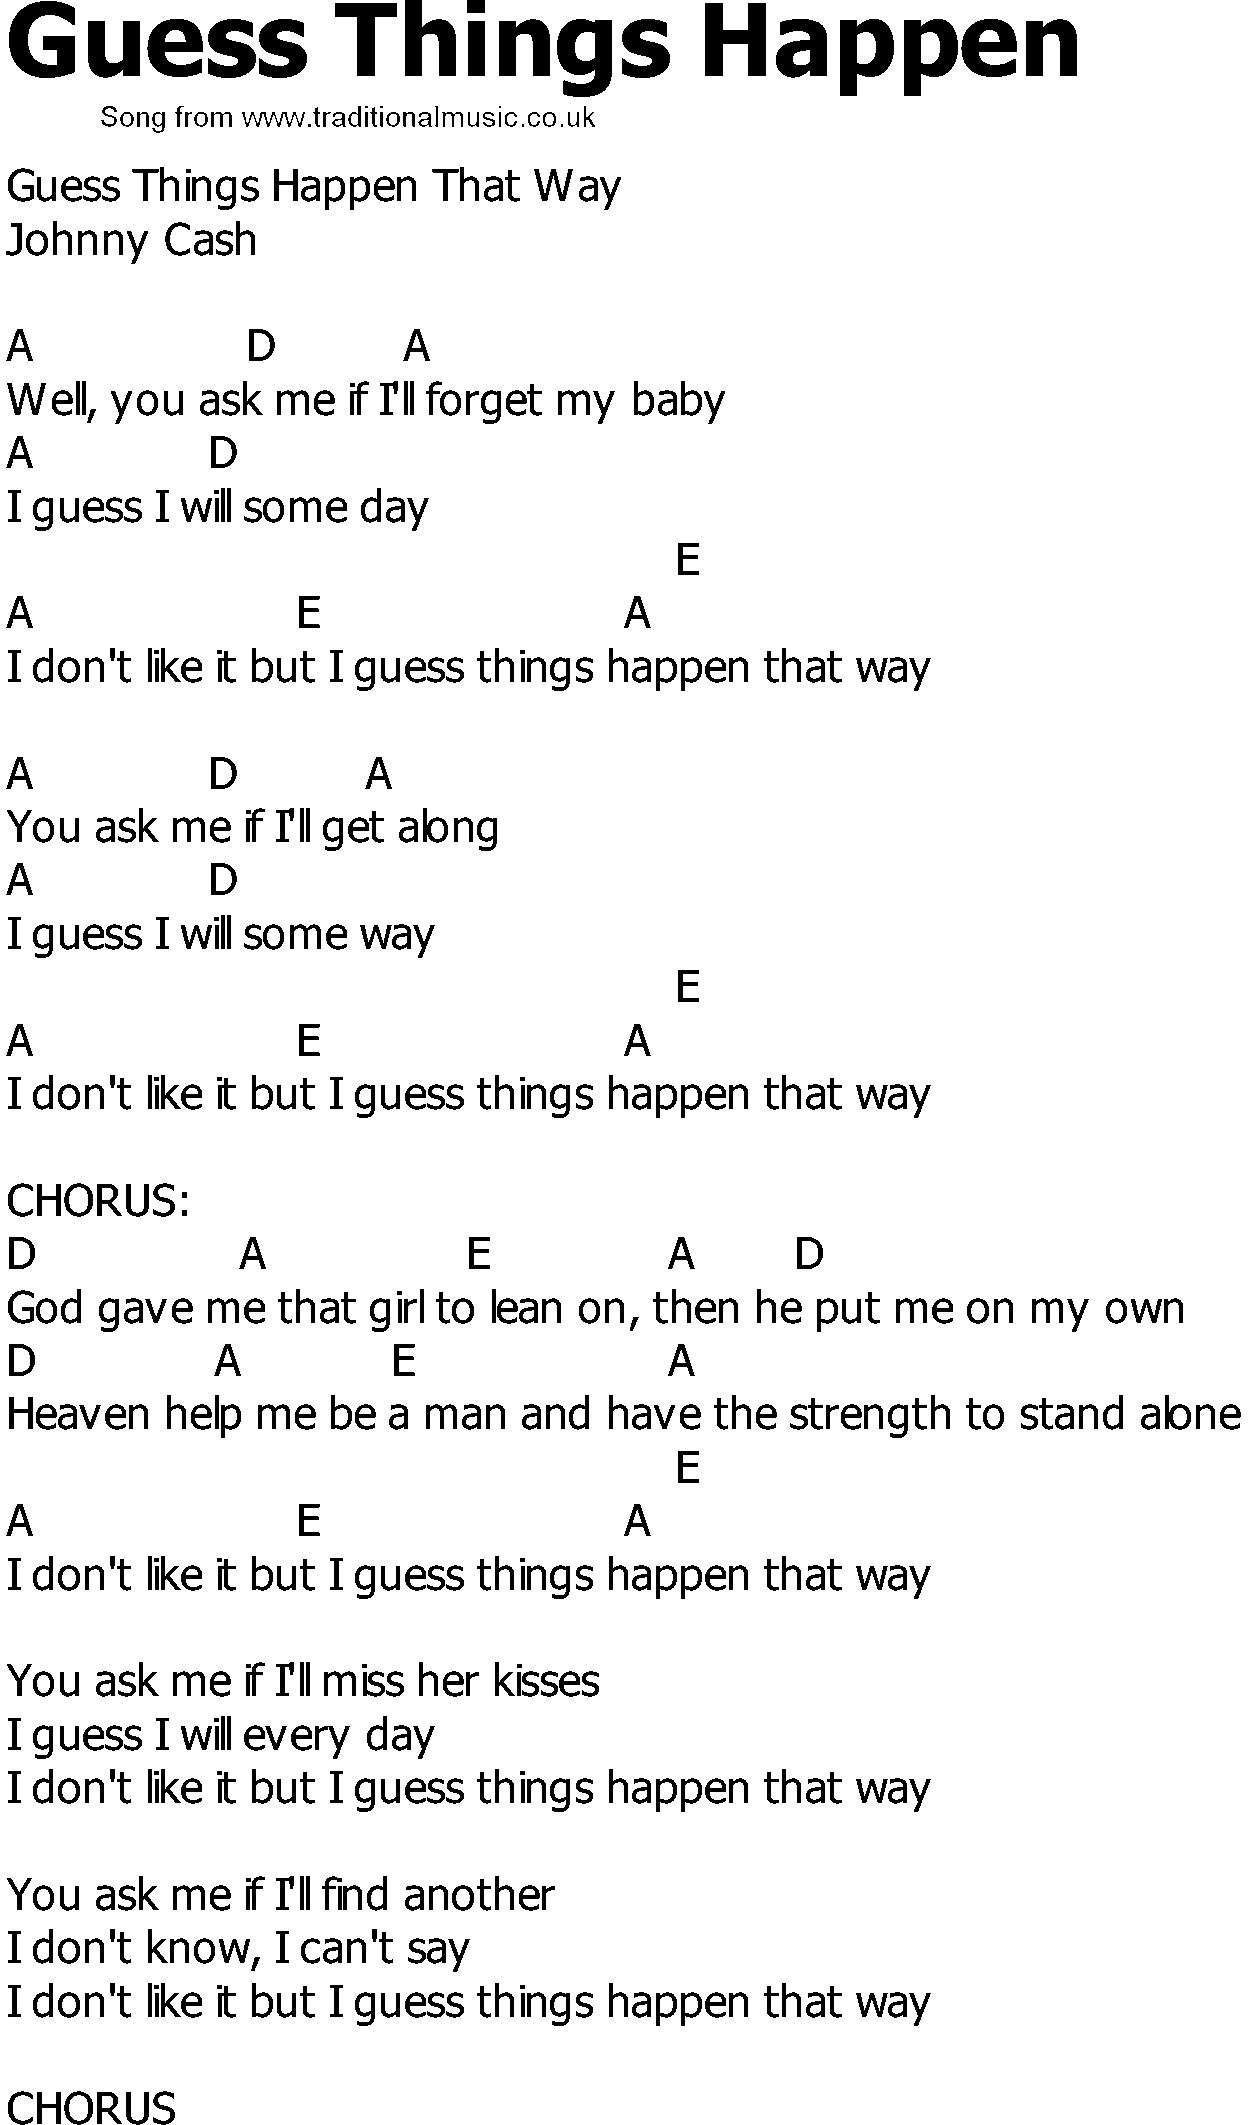 Old Country song lyrics with chords - Guess Things Happen